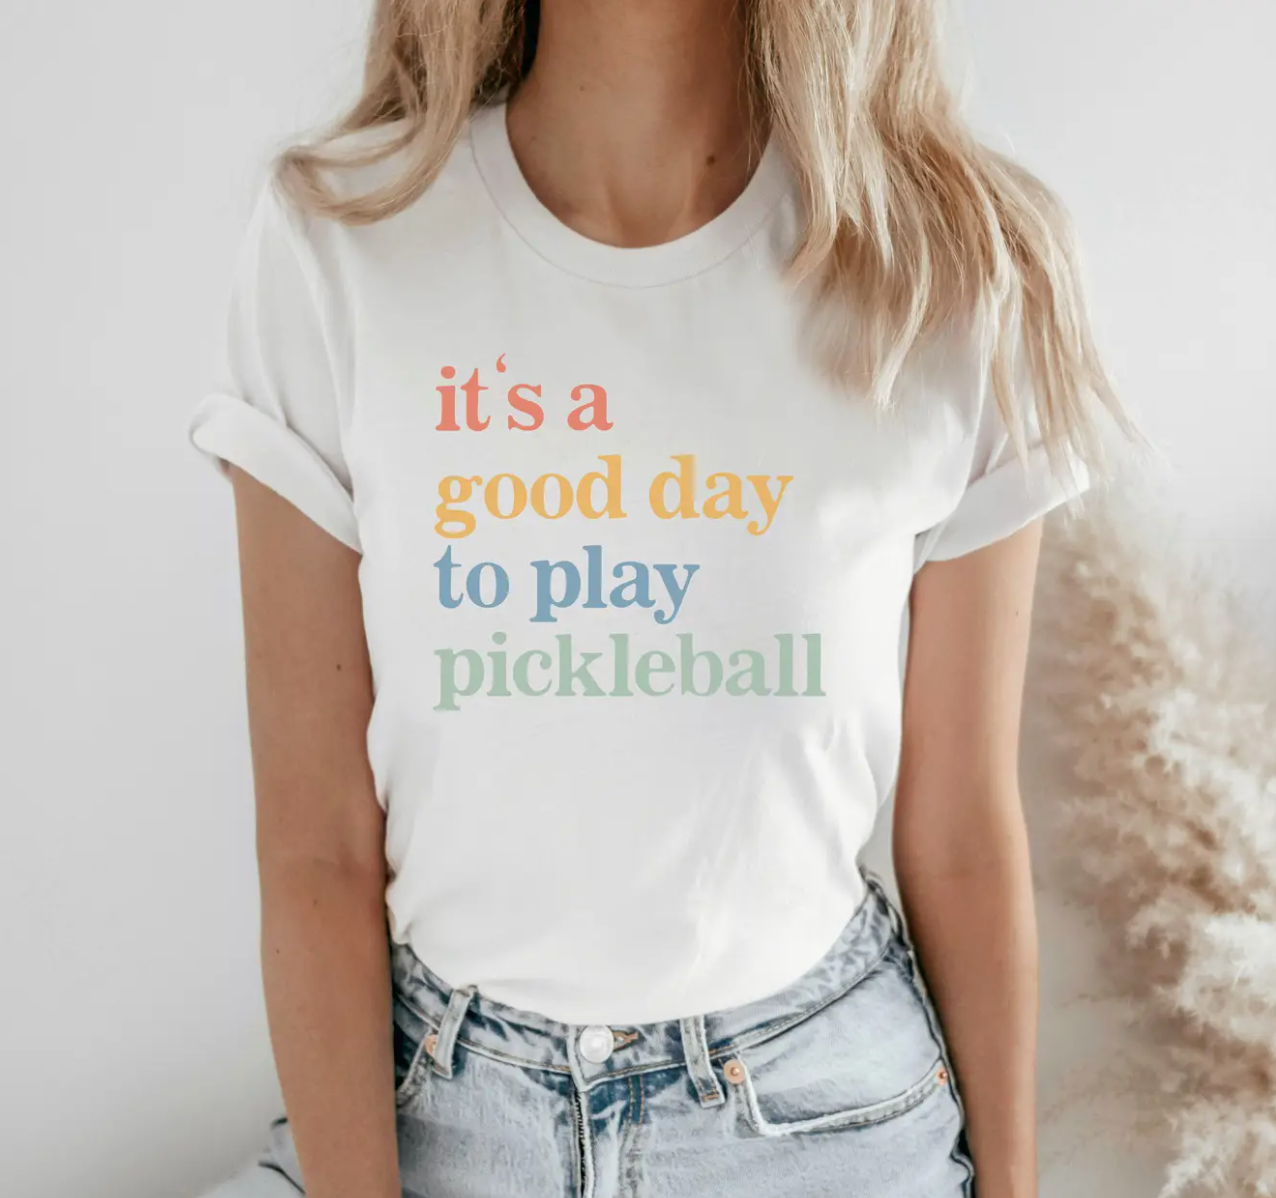 it's a good day to play pickleball t-shirt